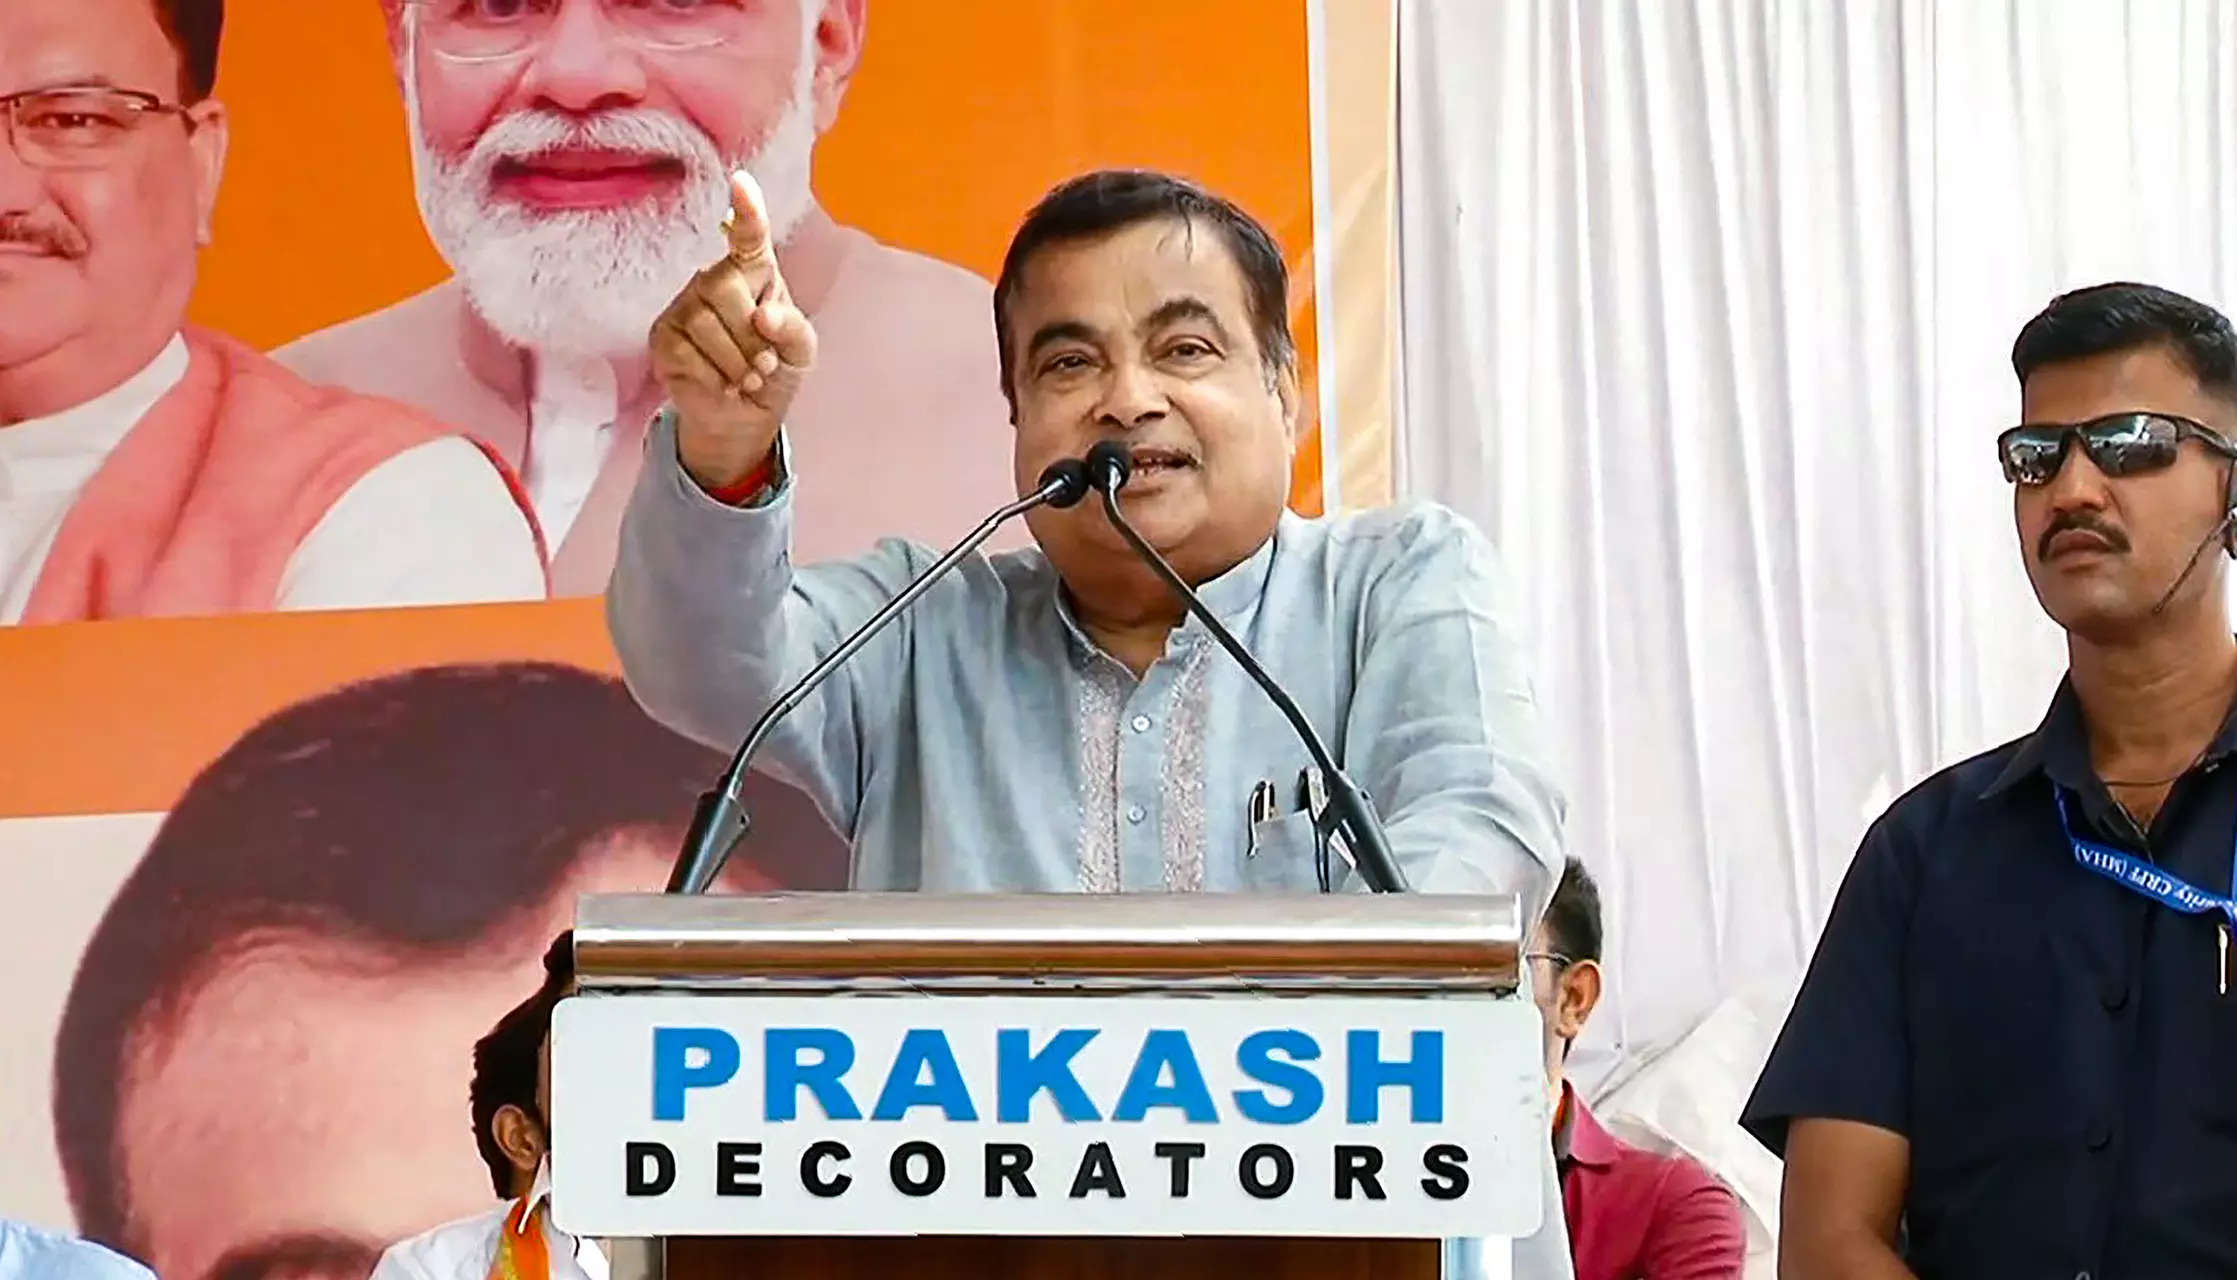 I'm completely alright, says Nitin Gadkari, cites heat for collapse at rally in Maharashtra 